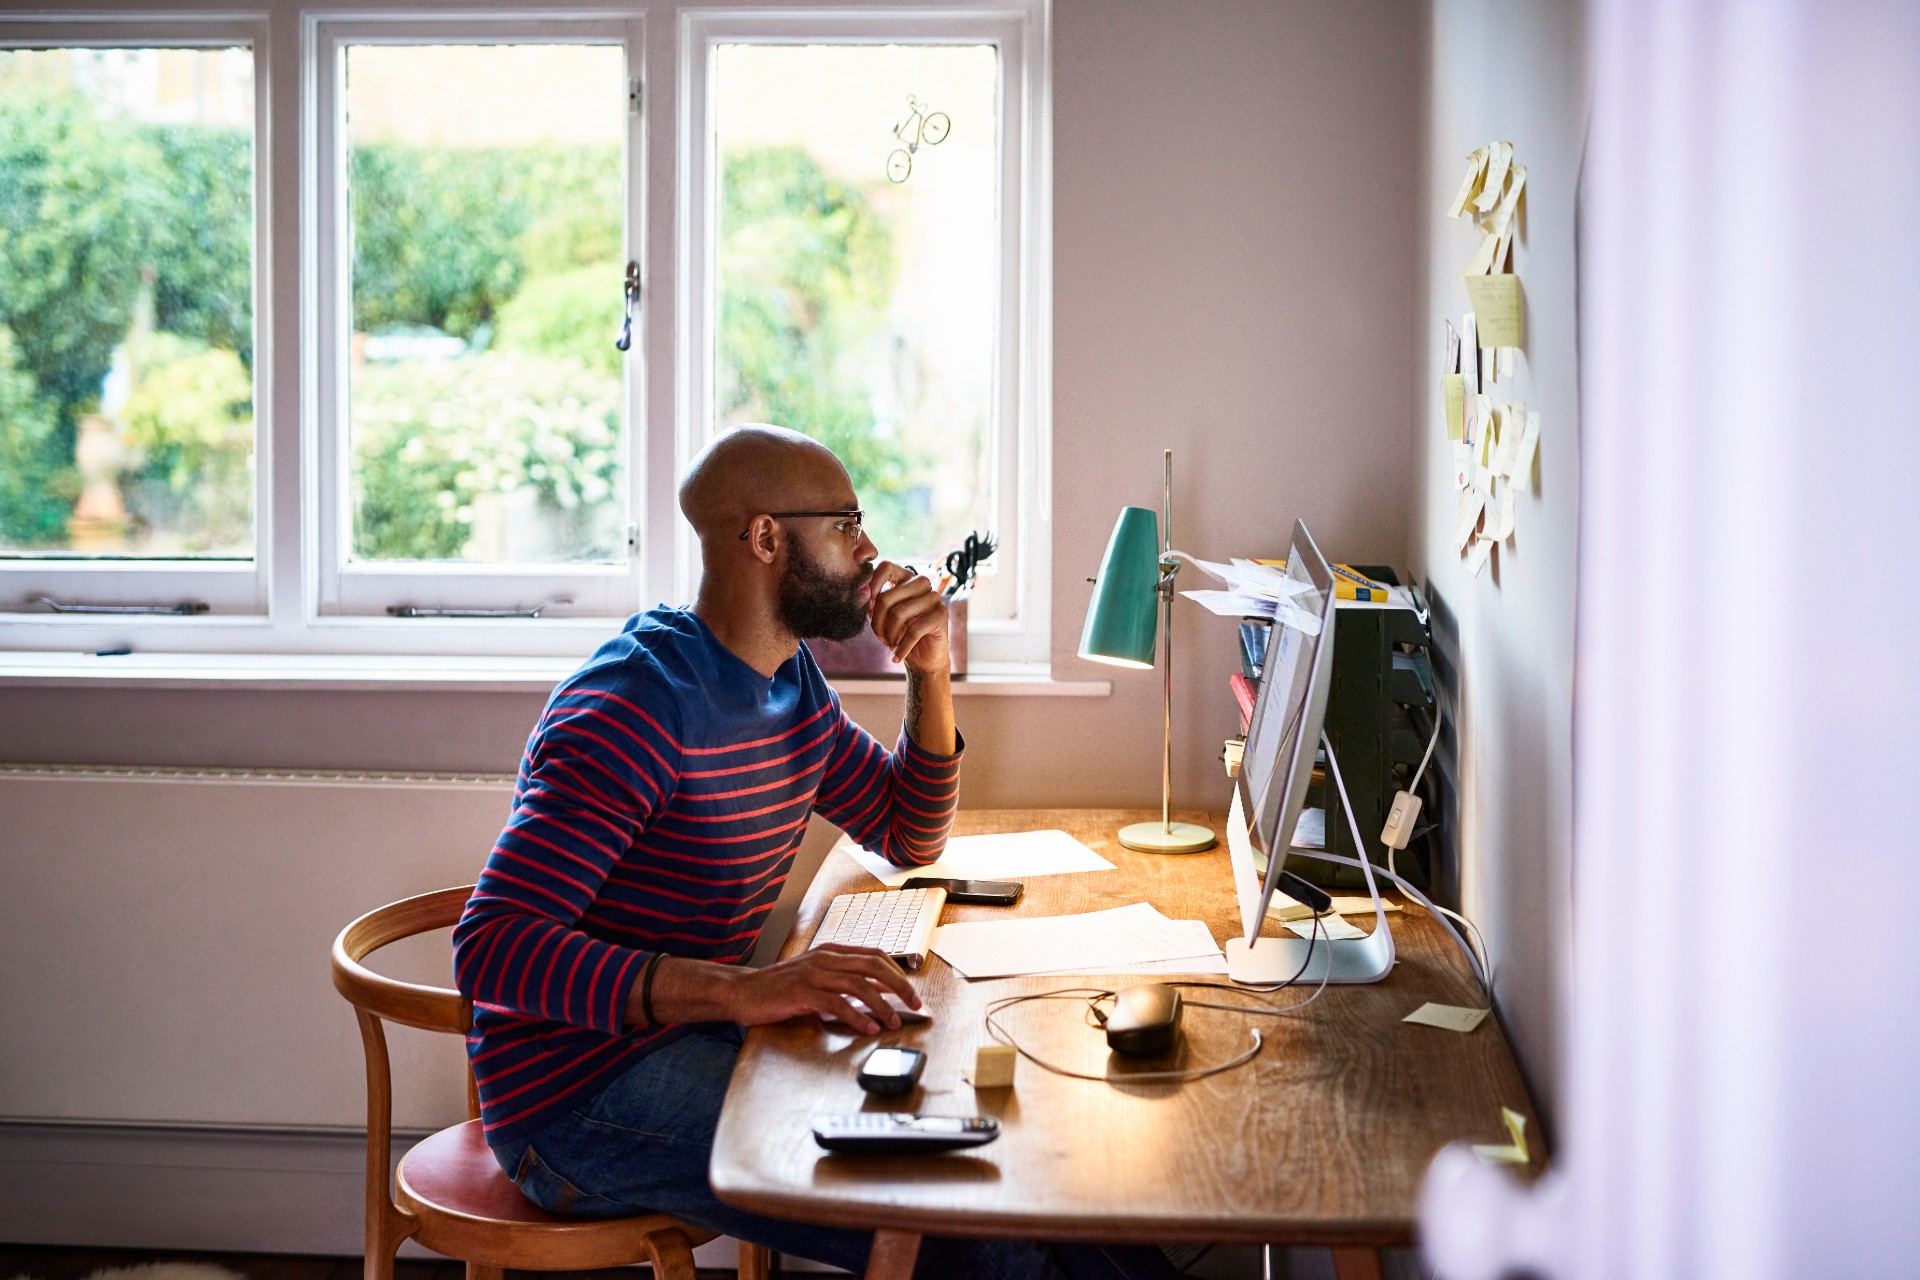 Man working at home with wooden desk